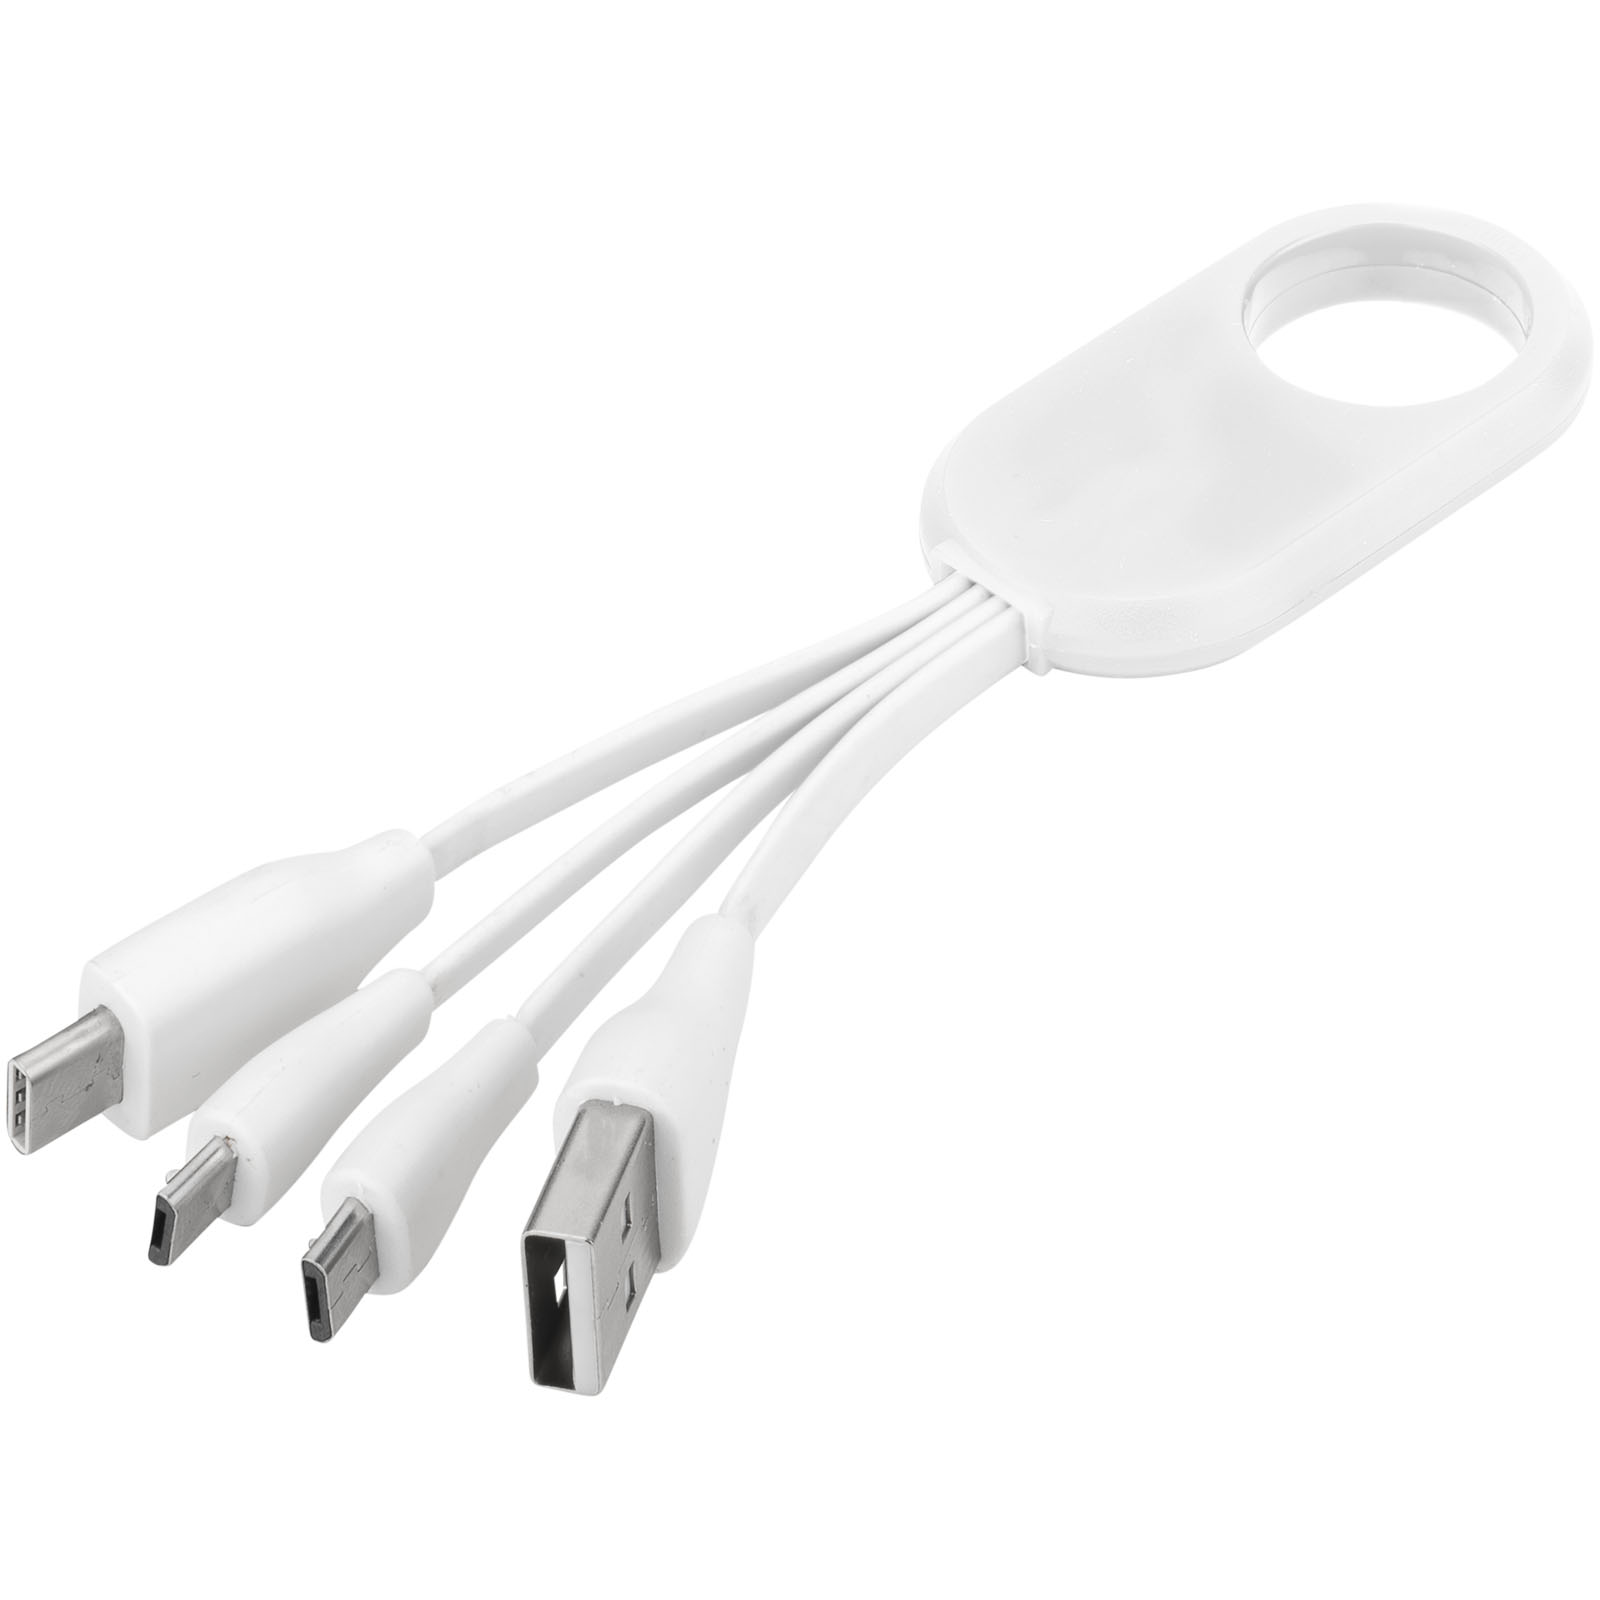 Advertising Cables - Troup 4-in-1 charging cable with type-C tip